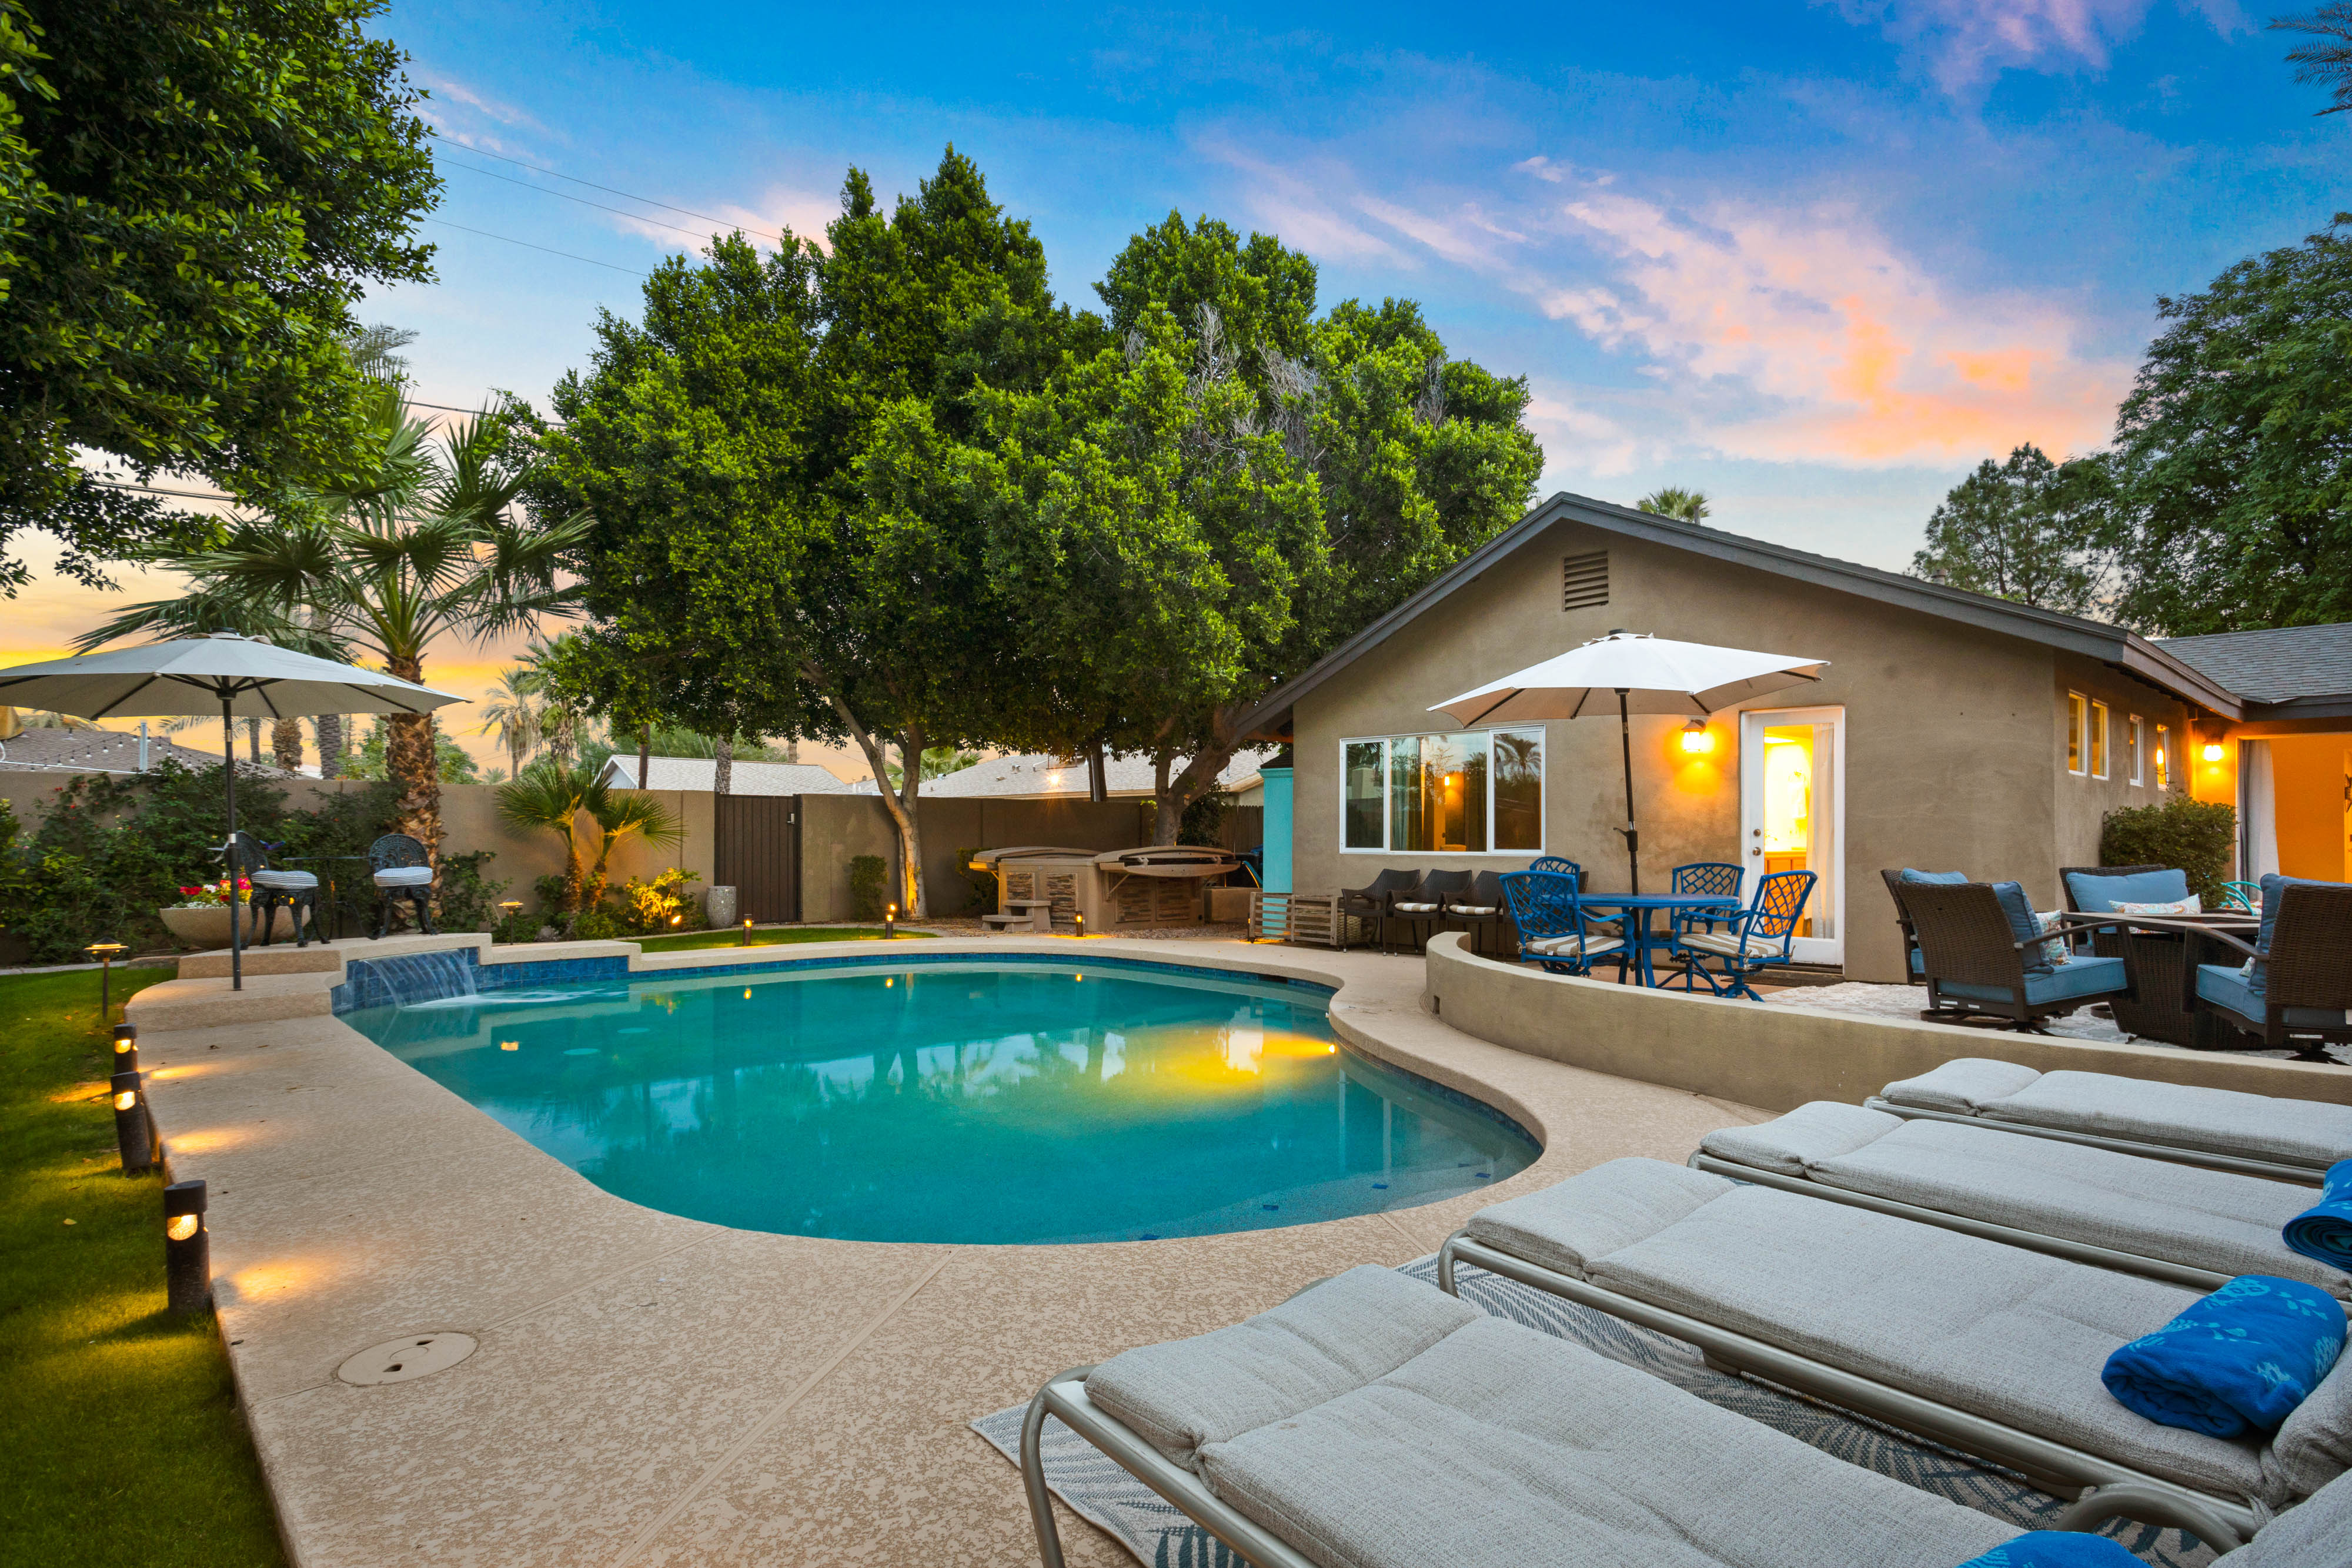 Pristine Pool & Outdoor Area Made For Entertaining